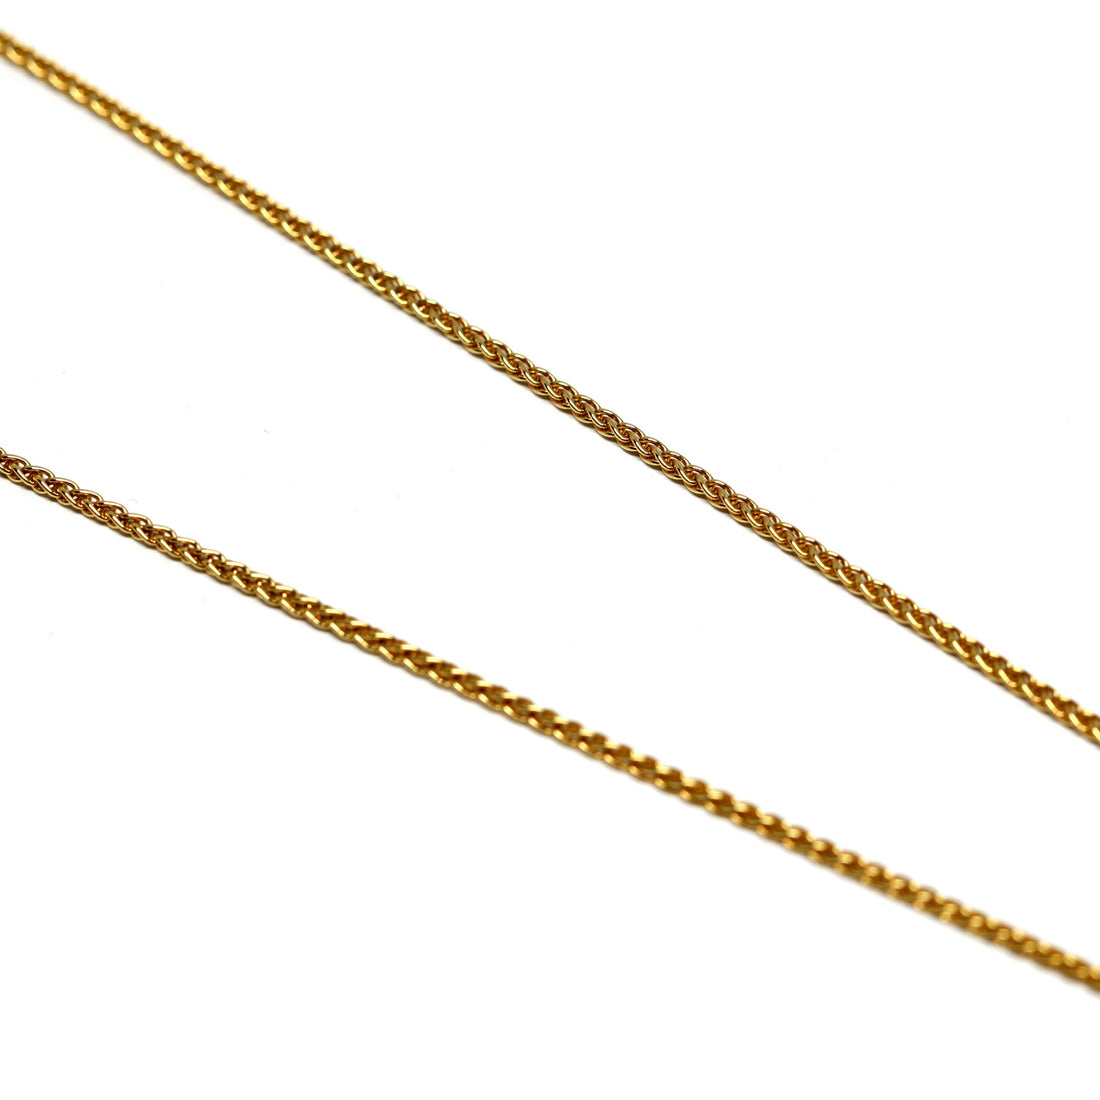 Bena Jewelry Weat Chain Vermeil Yellow Gold High Quality Manufacture Fine Jewelry in Montreal Canada